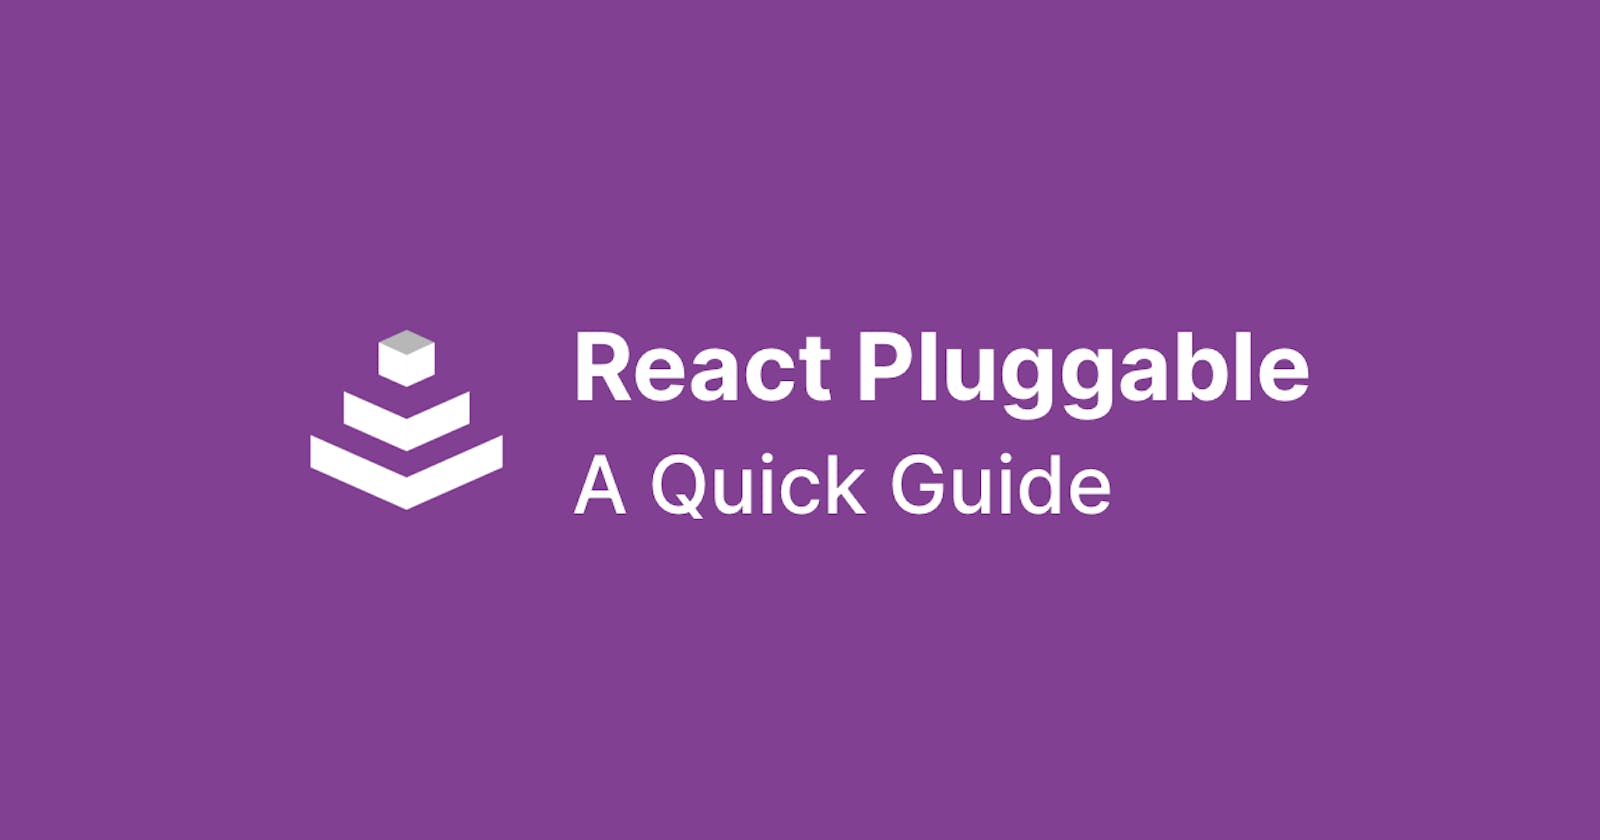 React Pluggable: A Quick Guide